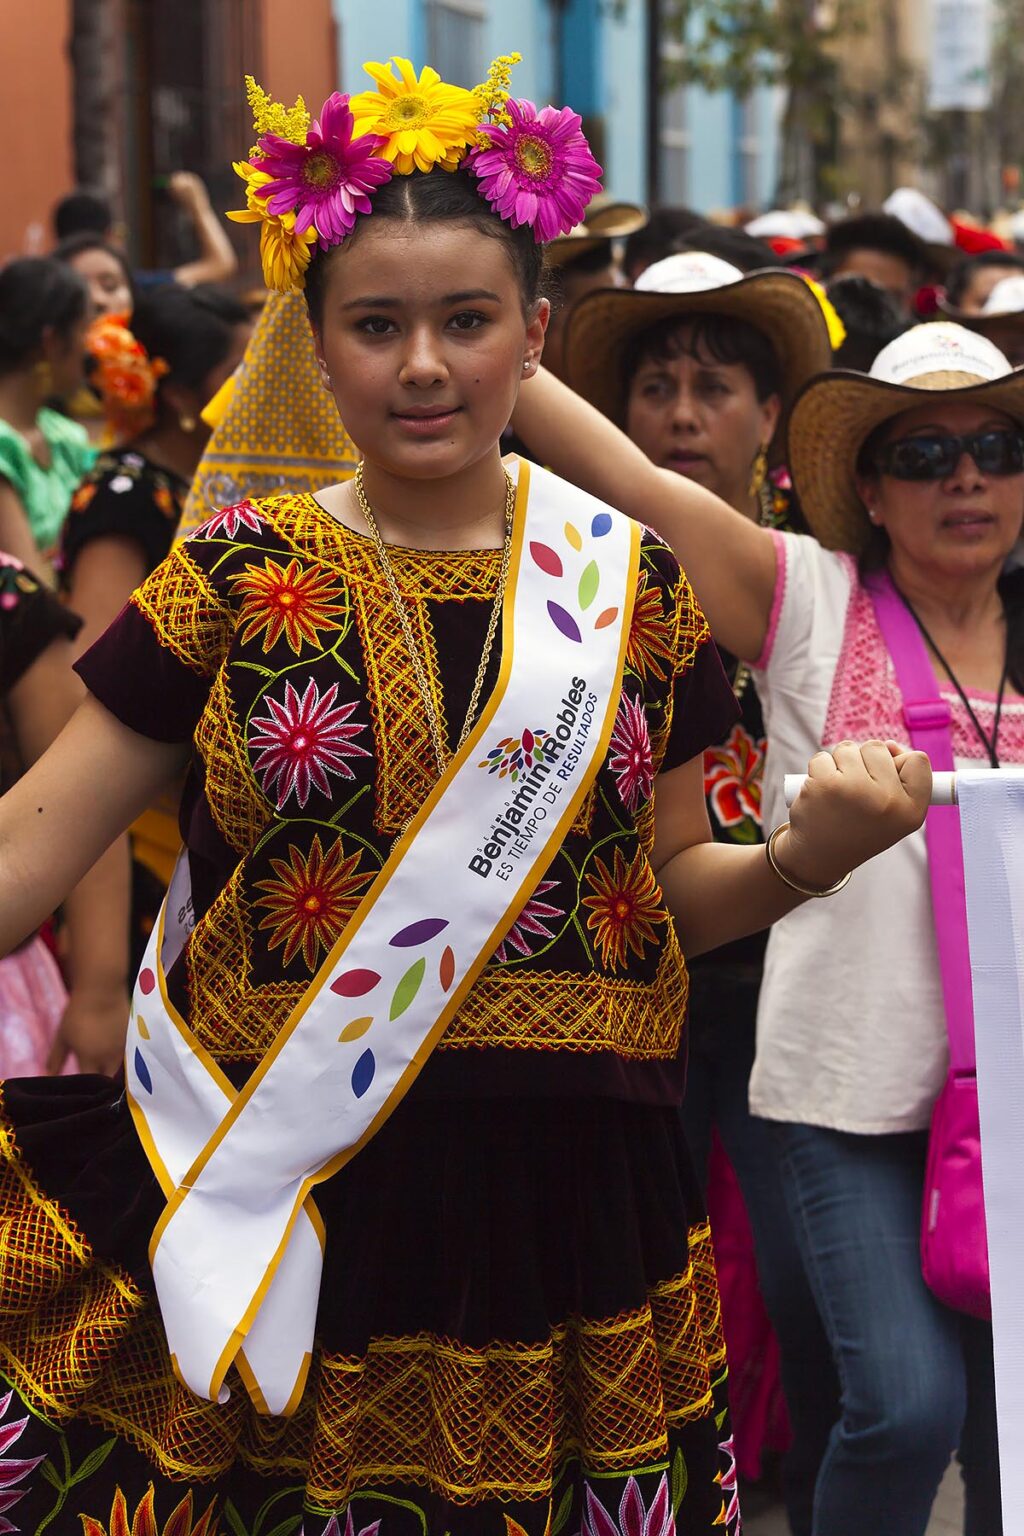 A traditionally dressed Mexican woman in a parade during the July GUELAGUETZA FESTIVAL - OAXACA, MEXICO